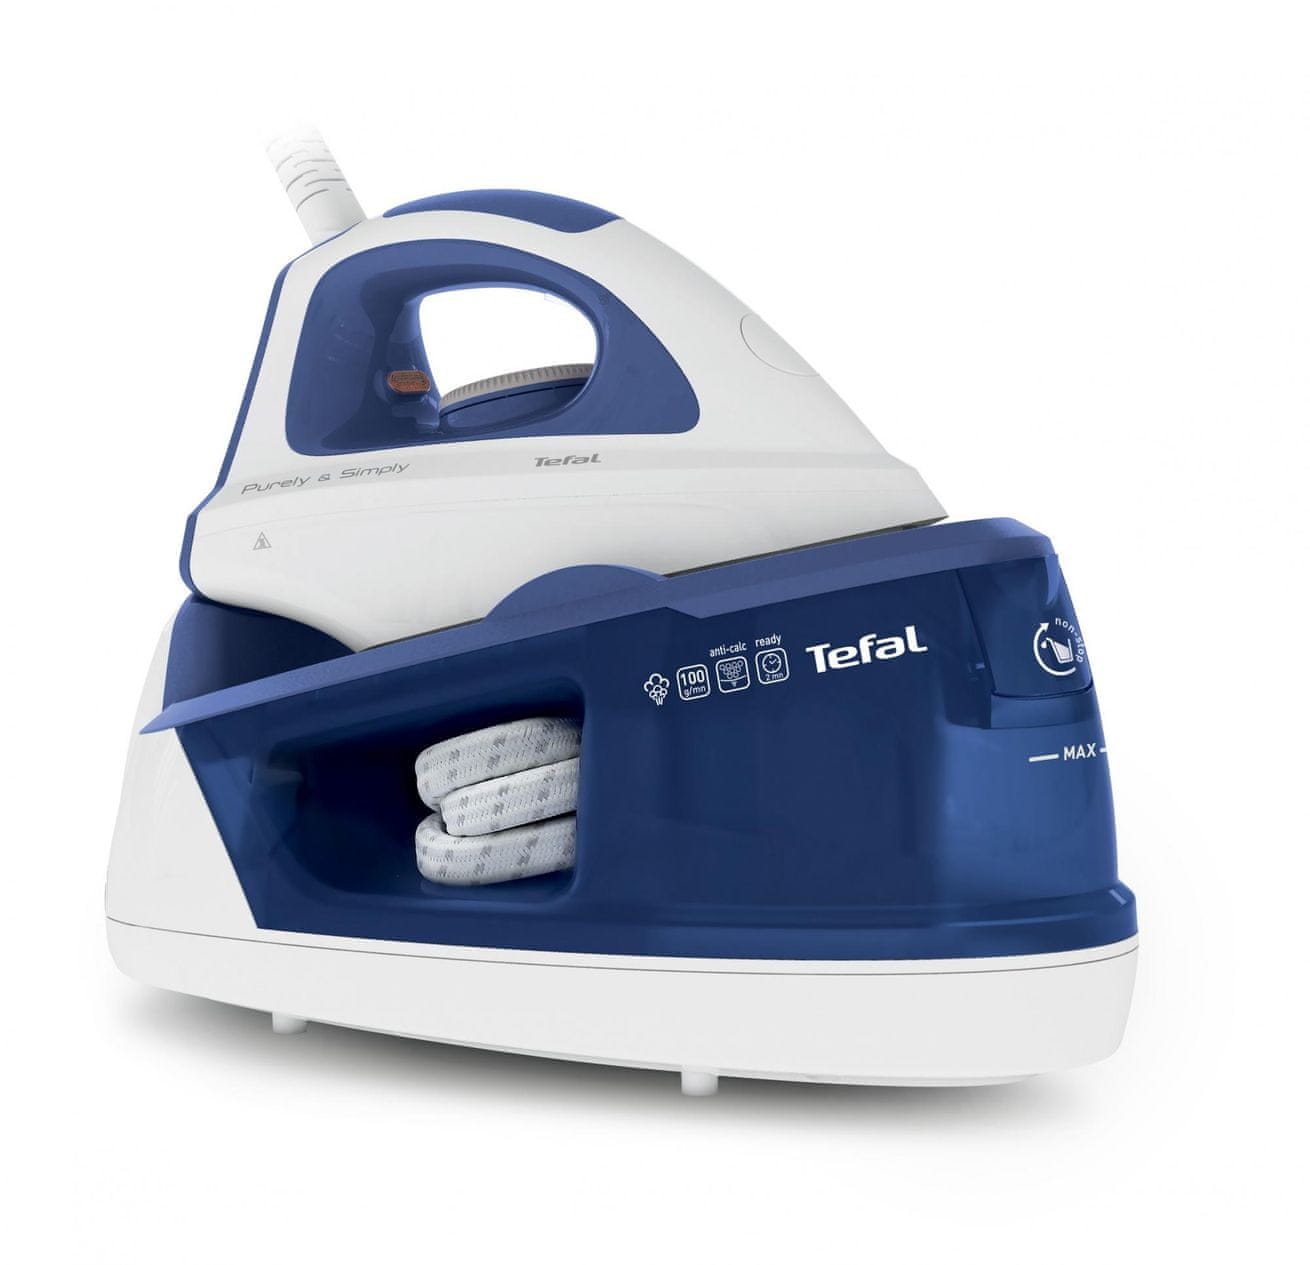 Tefal SV 5030E0 Purely and Simply